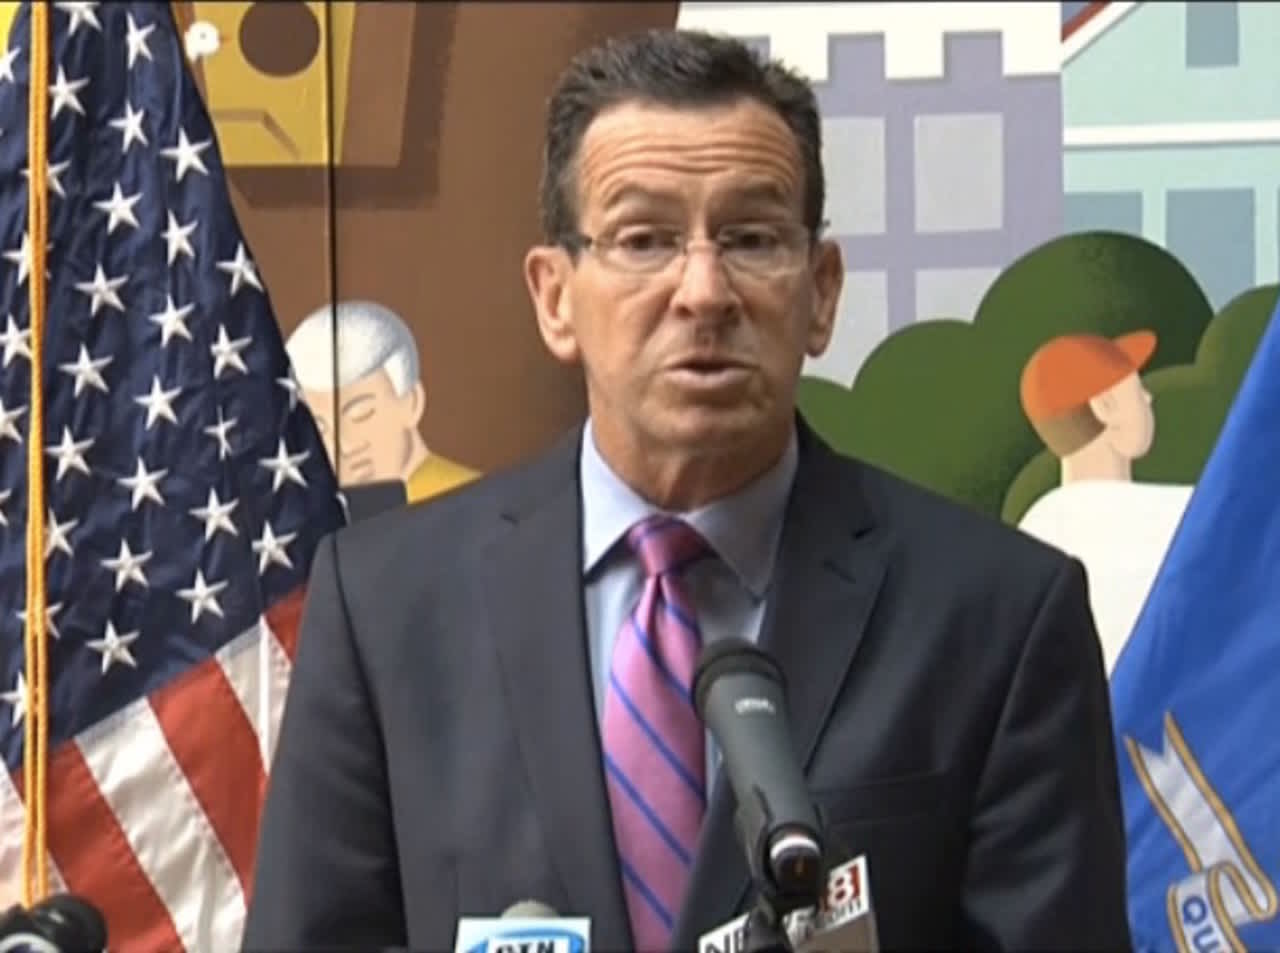 Gov. Dannel P. Malloy announced 20 projects in towns and cities across Connecticut will receive nearly $11 million in funding under a competitive grant program.